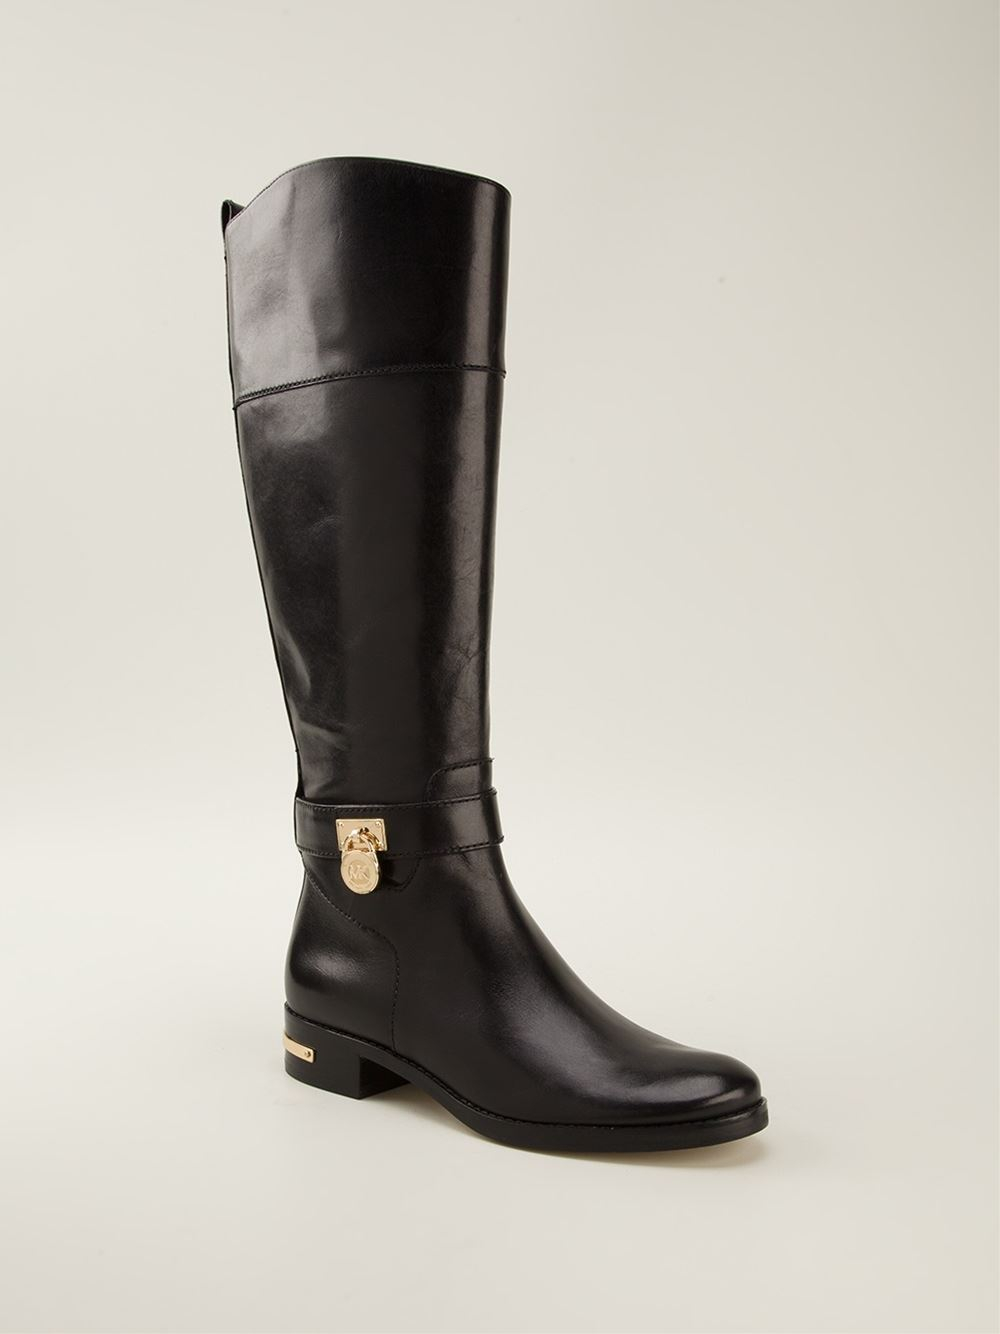 Lyst - MICHAEL Michael Kors 'Aileen' Riding Boots in Black